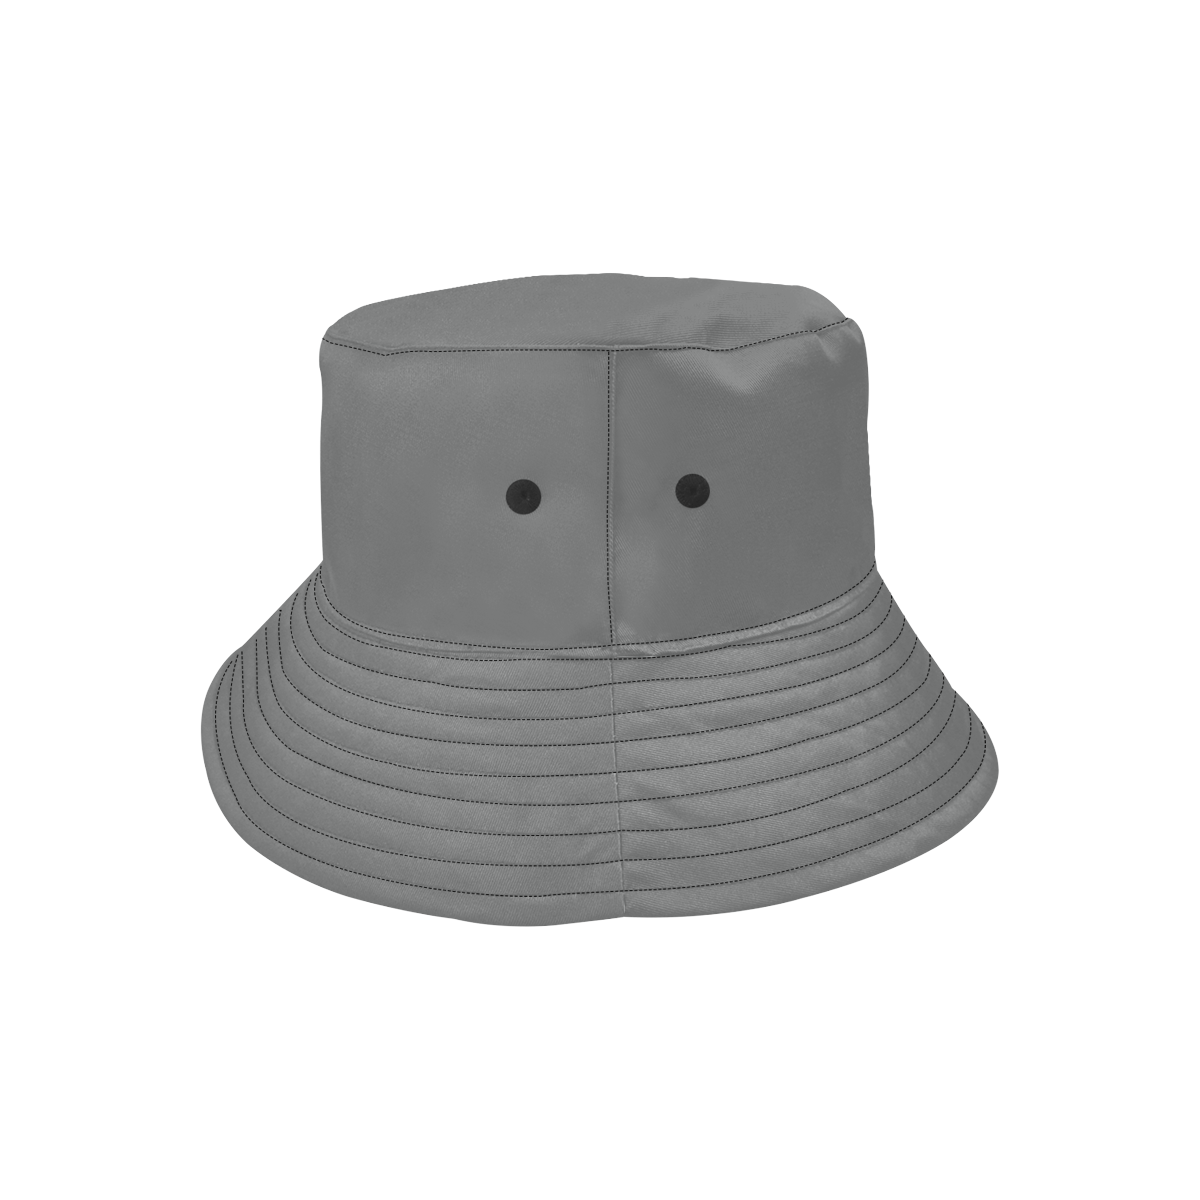 Peaceful Pewter Solid Colored All Over Print Bucket Hat